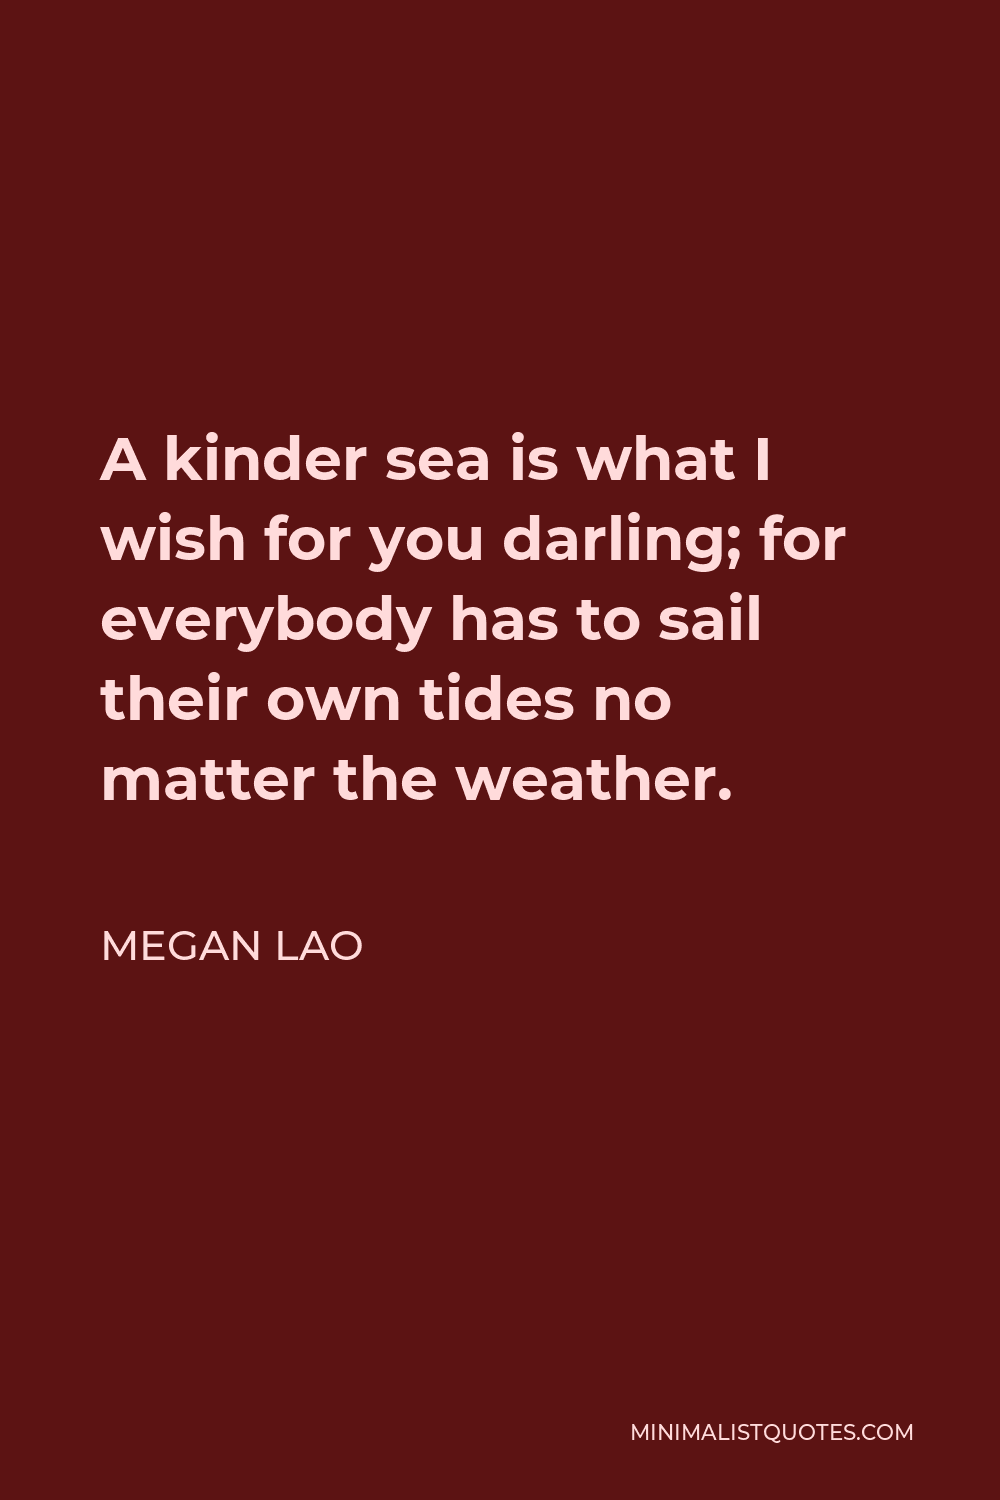 Megan Lao Quote - A kinder sea is what I wish for you darling; for everybody has to sail their own tides no matter the weather.